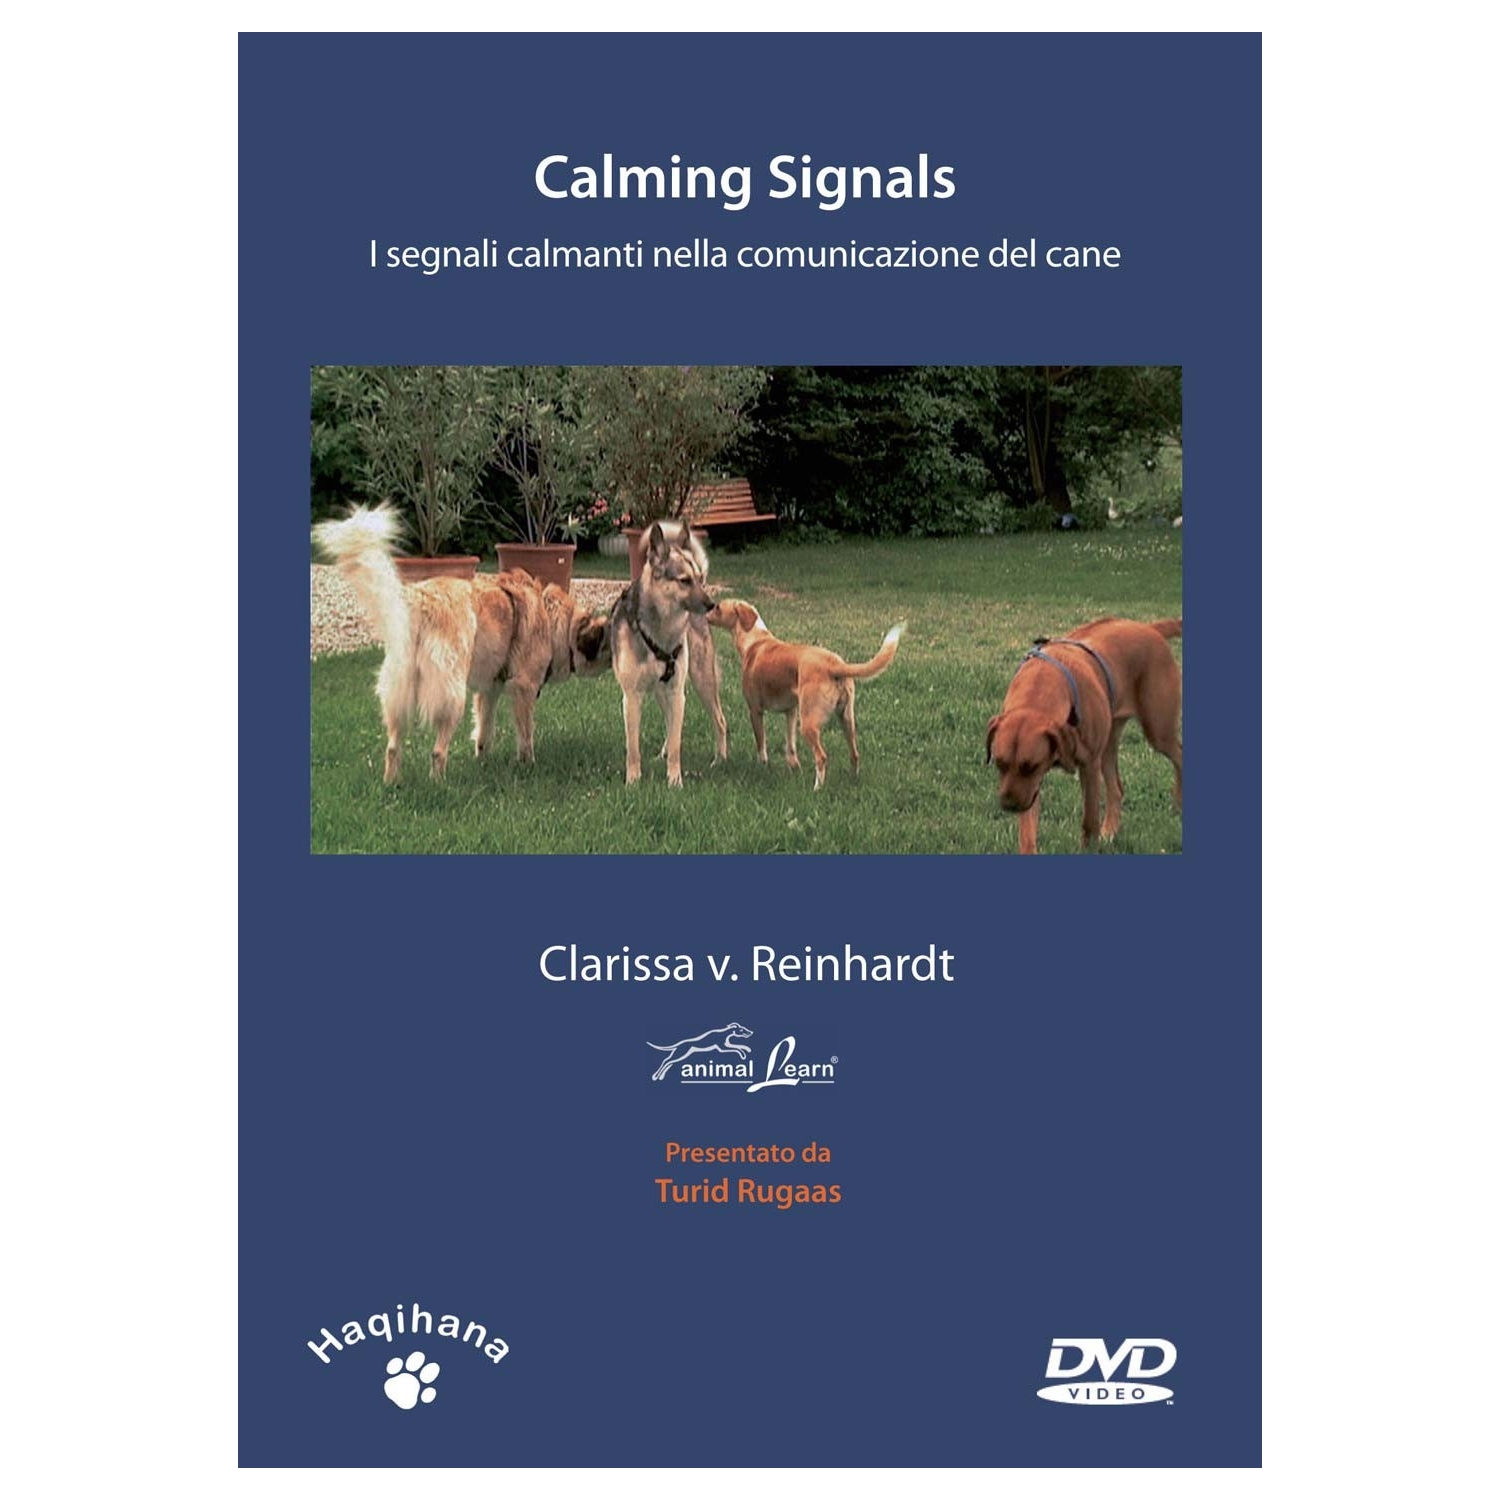 Calming Signals (italian only)